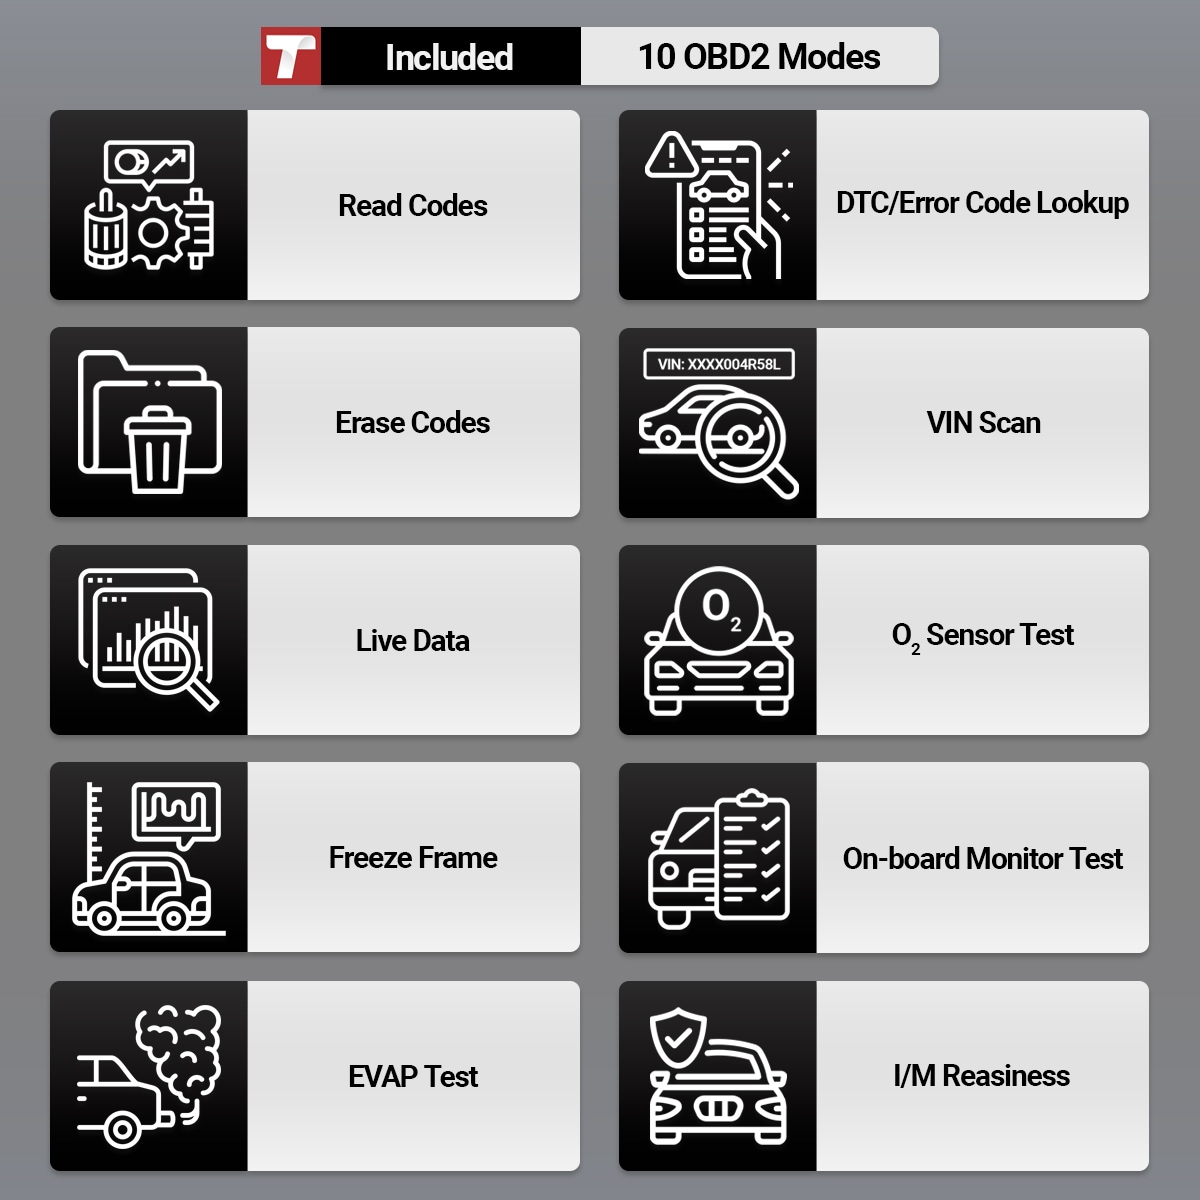 THINKCHECK M70 - 5 Full System OBD2 Scanner Car Code Reader Tablet Co —  THINKCAR